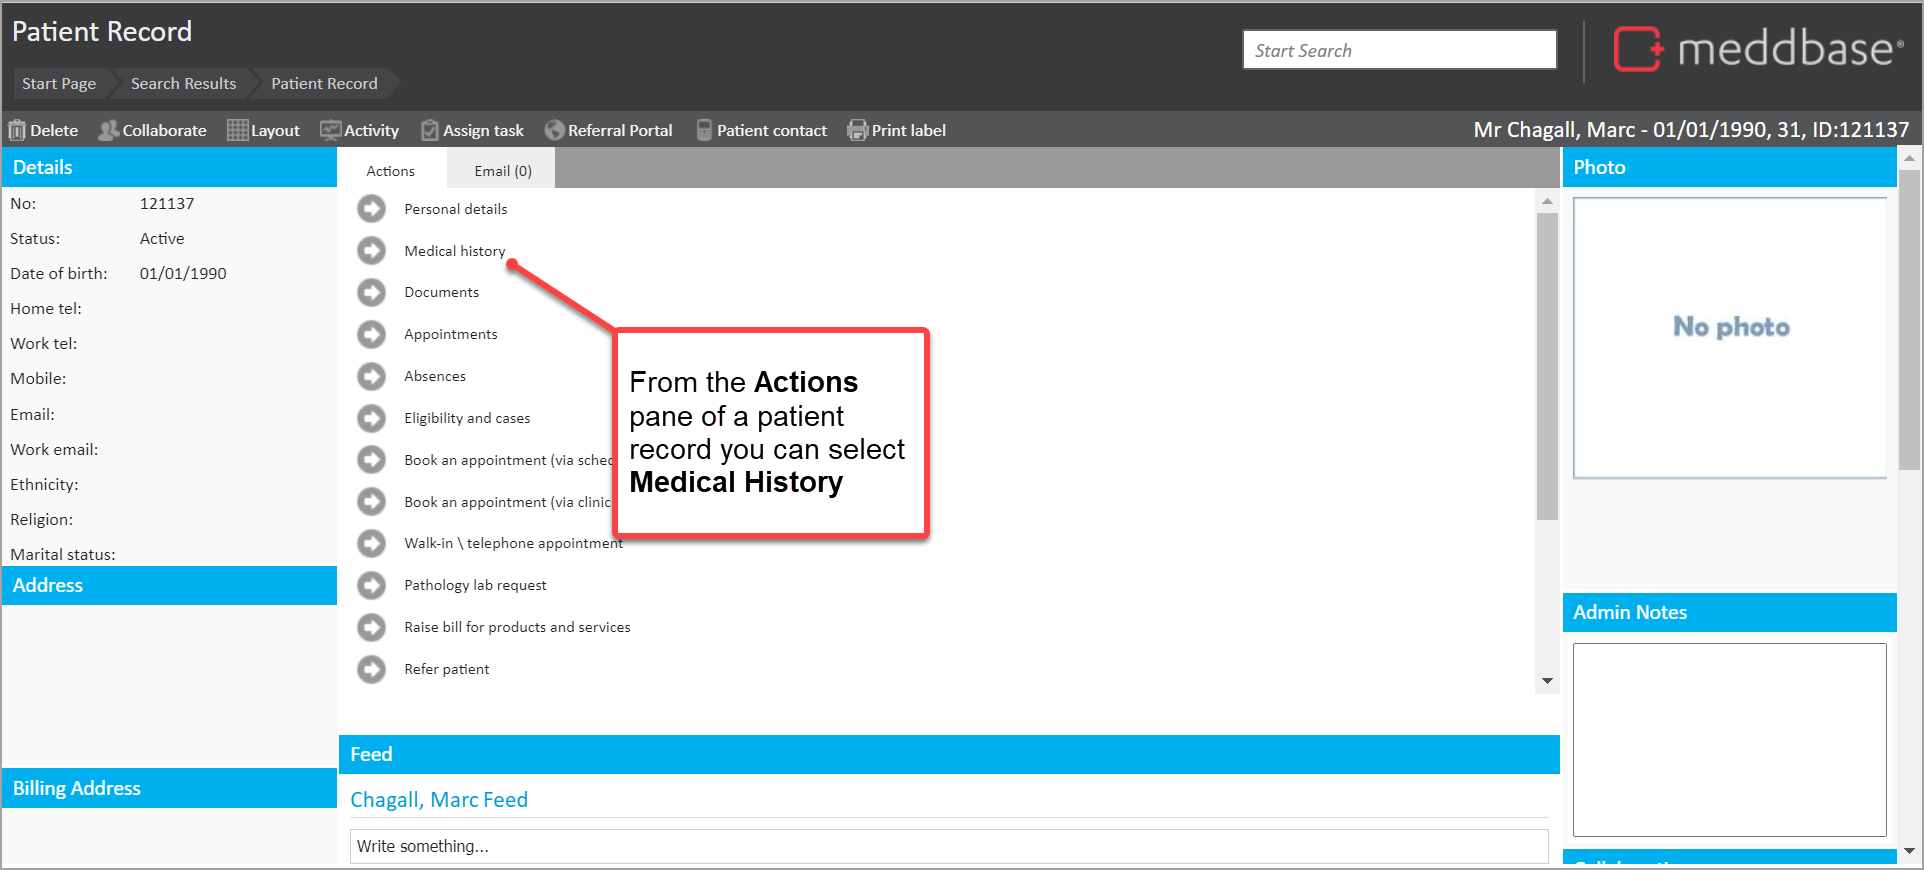 1_-_Patient_record_displayed_with_annotation_drawing_attention_to_Medical_History_option_in_Actions_panel.png